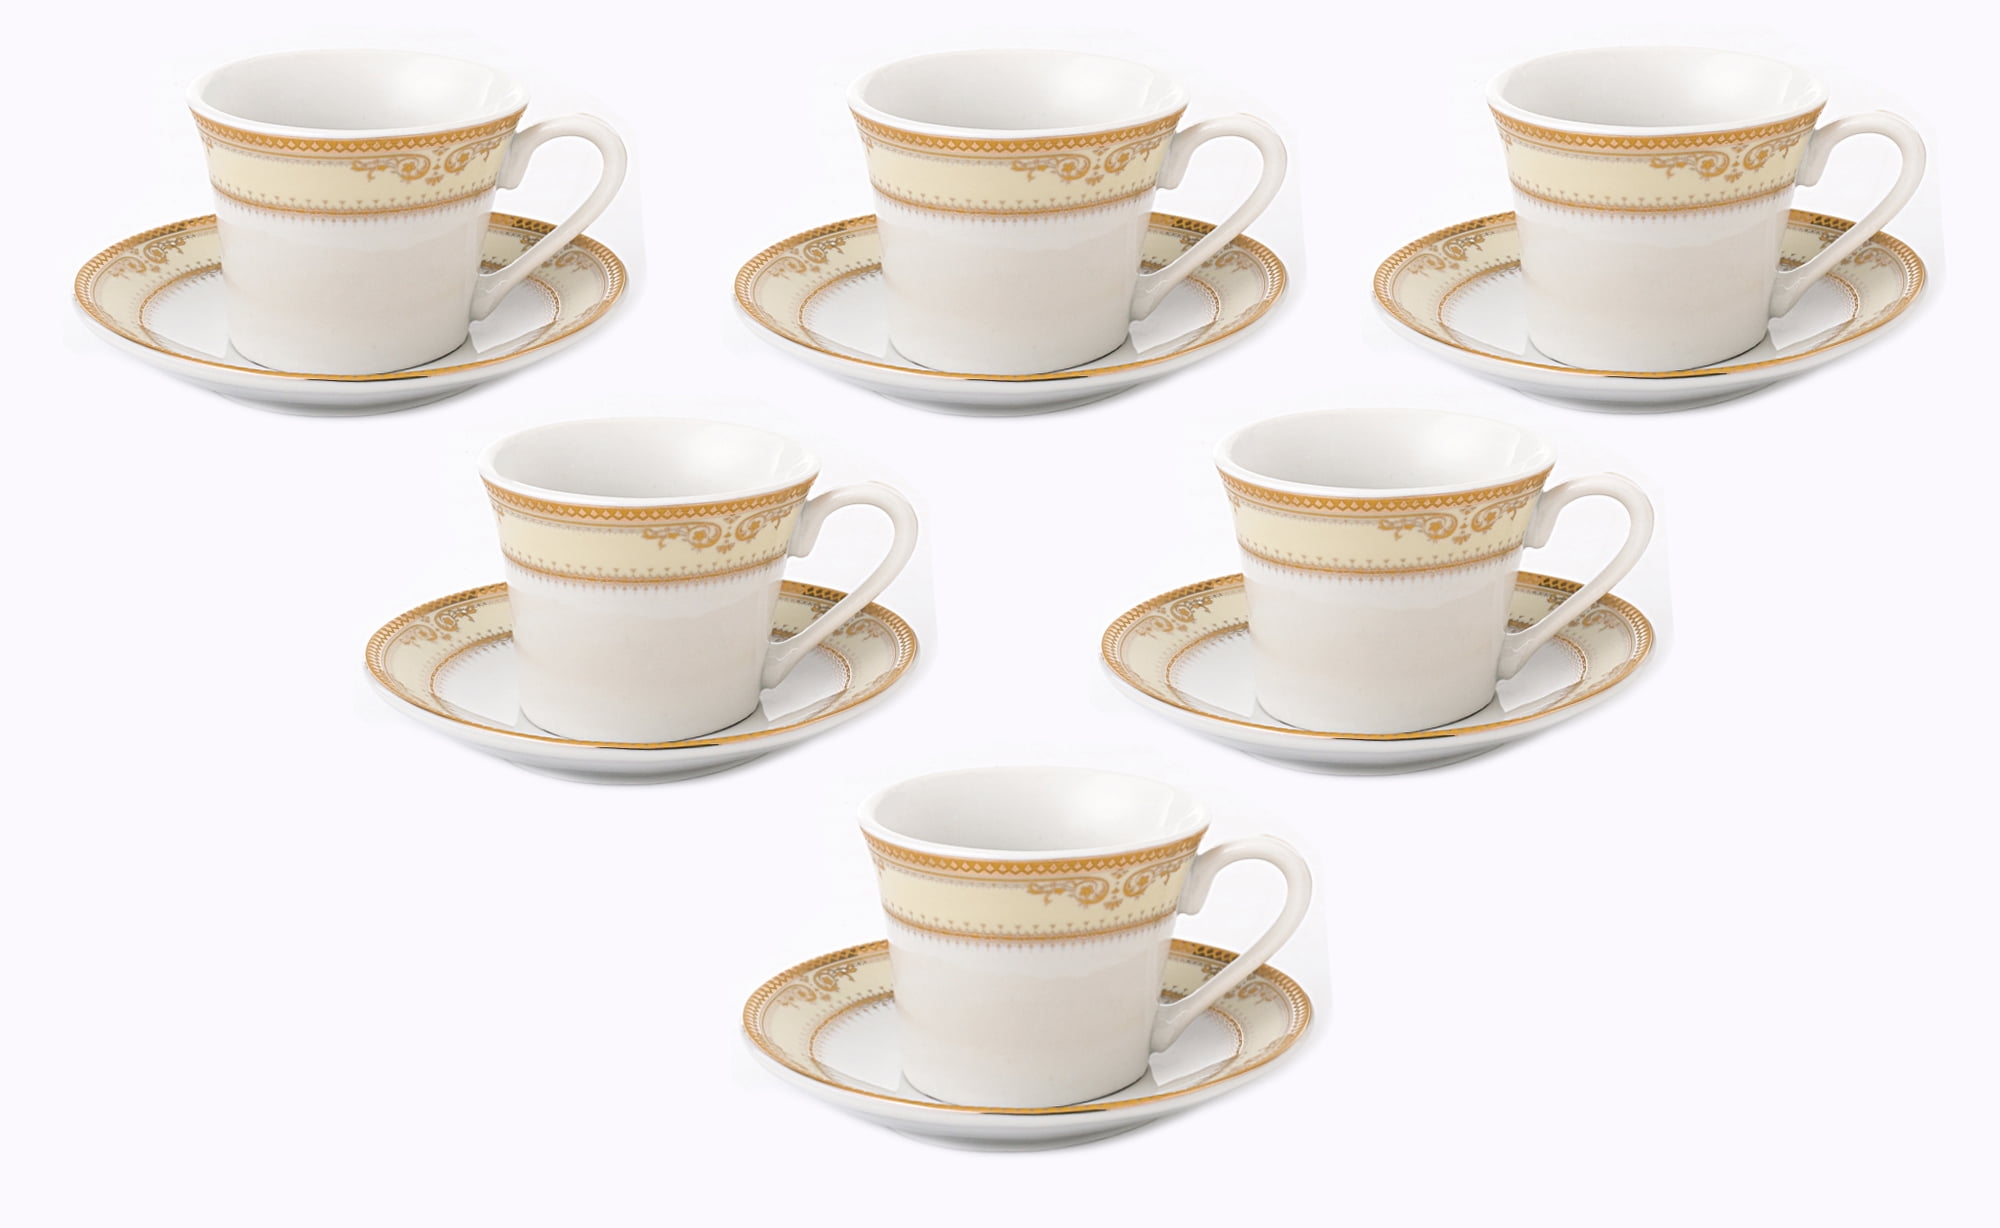 Hoomeet Ceramic Espresso Cups and Saucers, Set Of 6